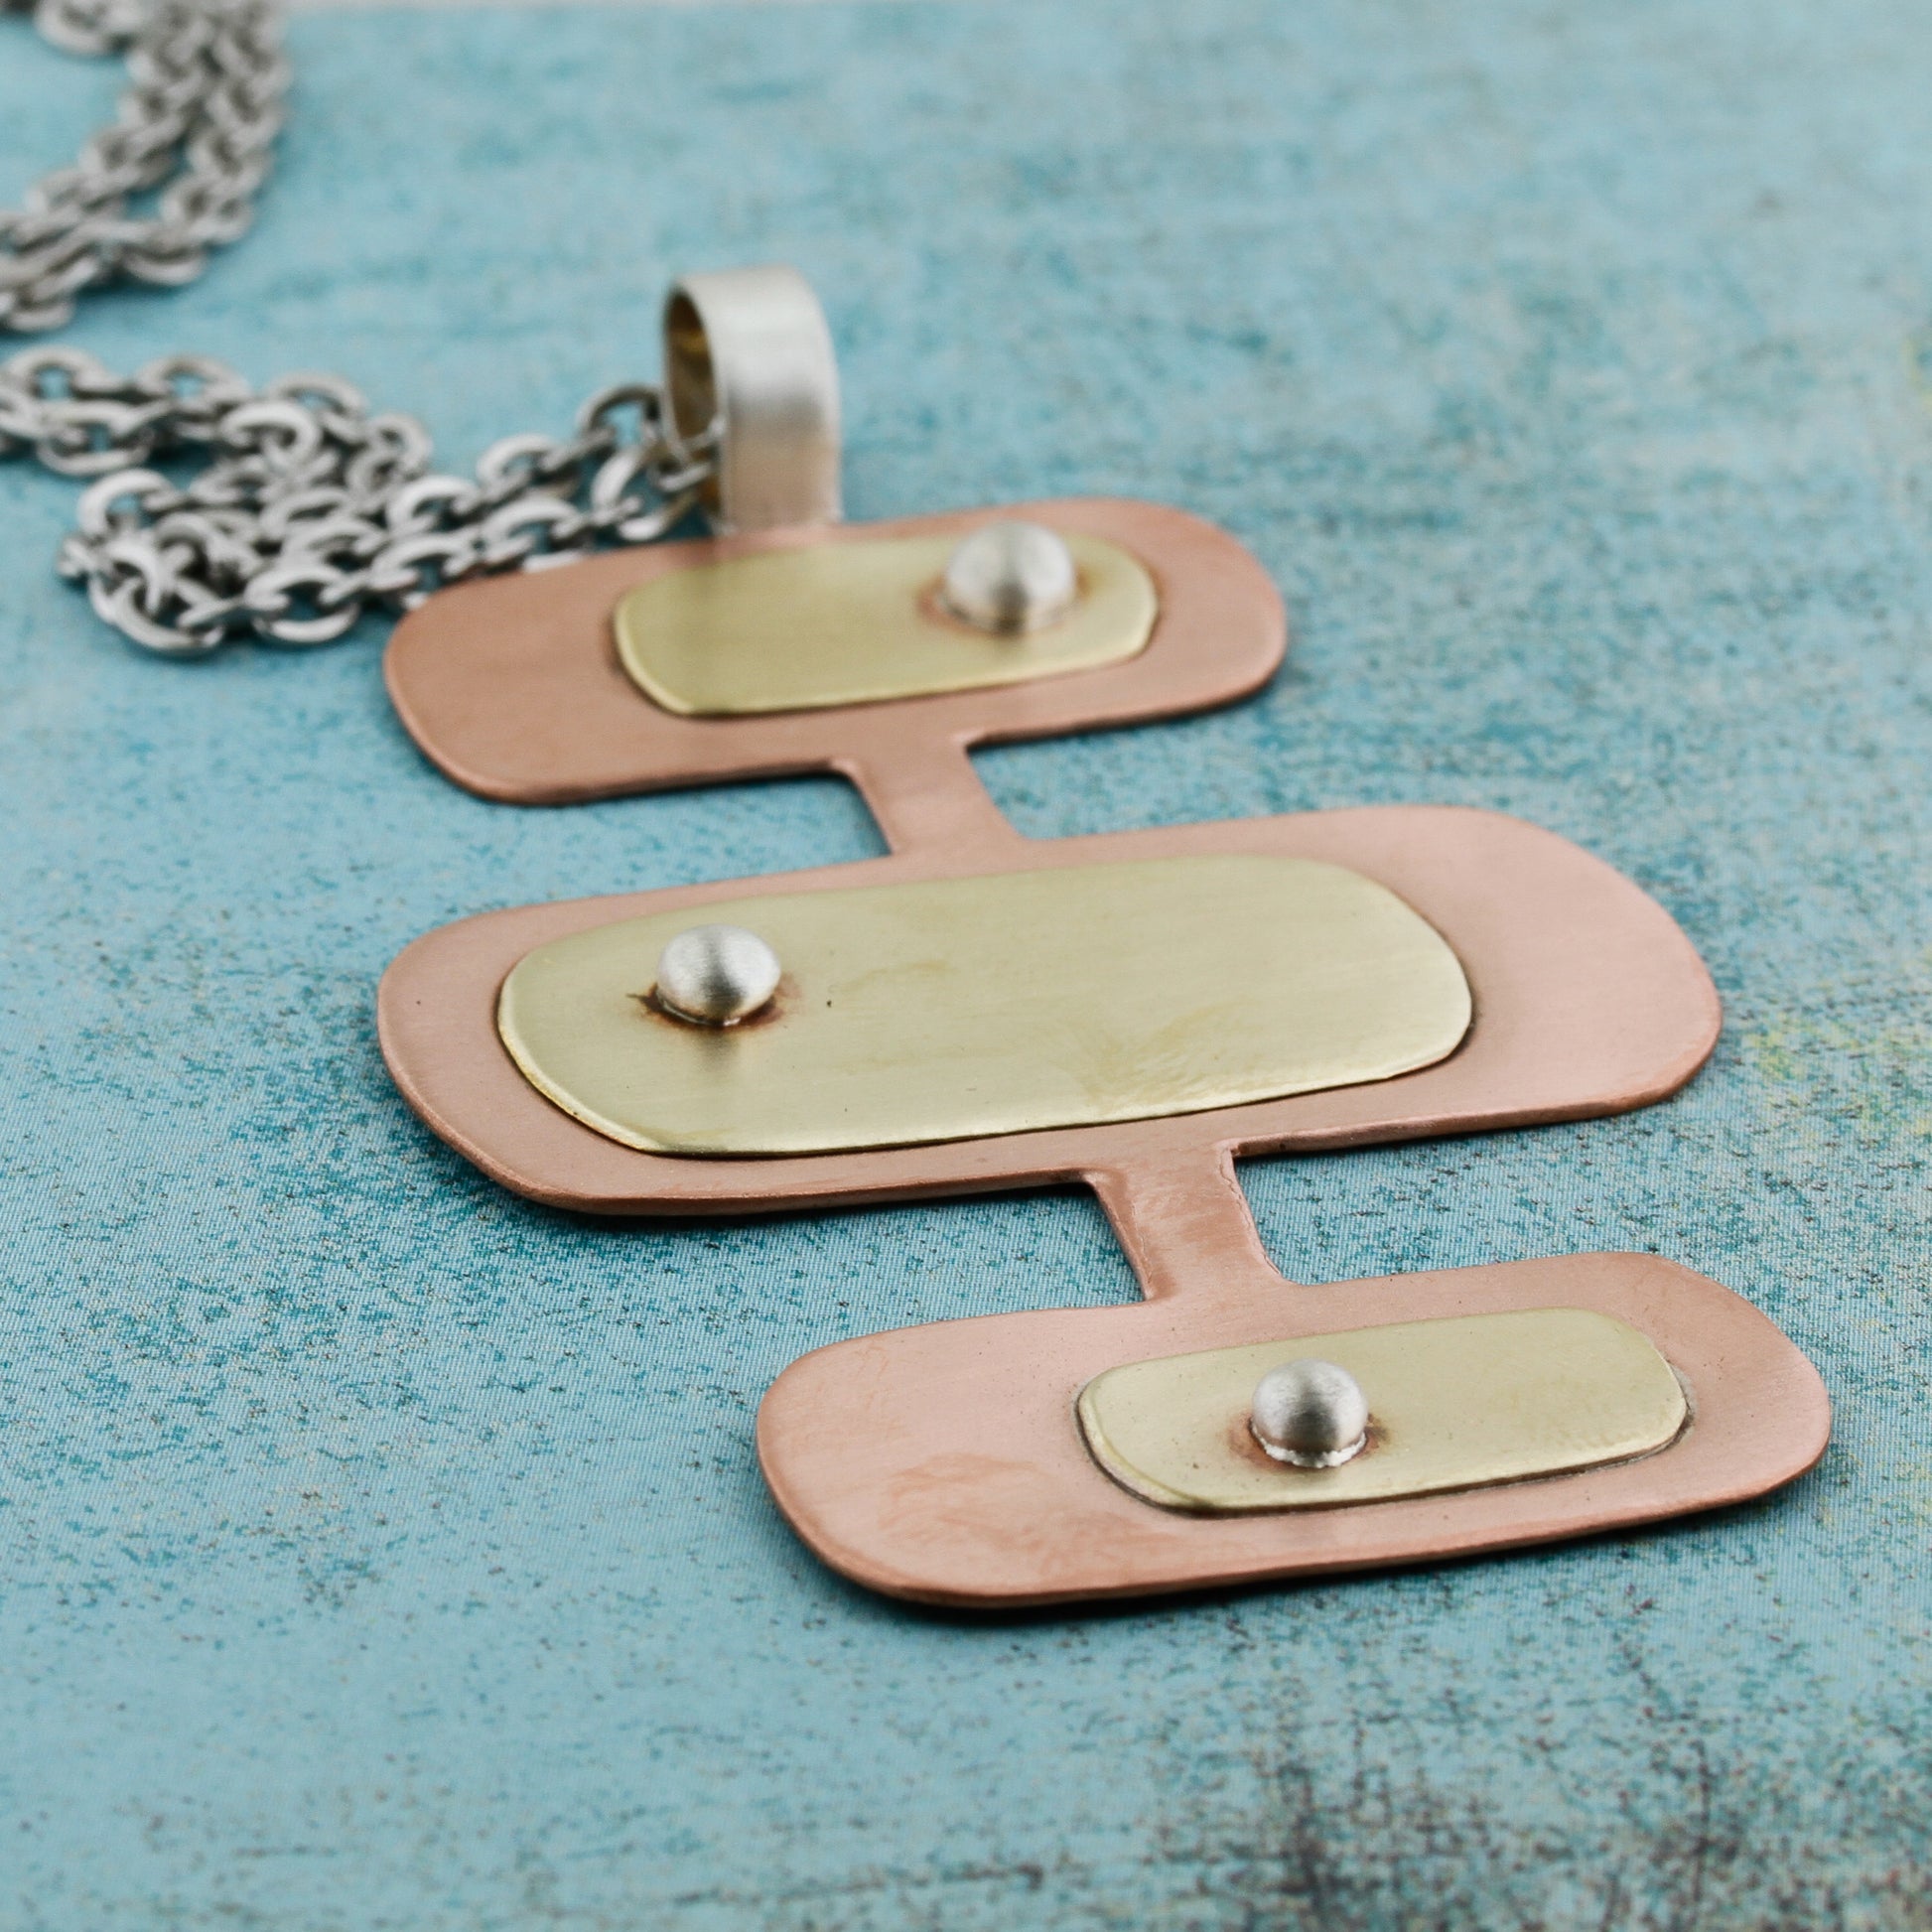 Modernist shapes in copper and brass necklace